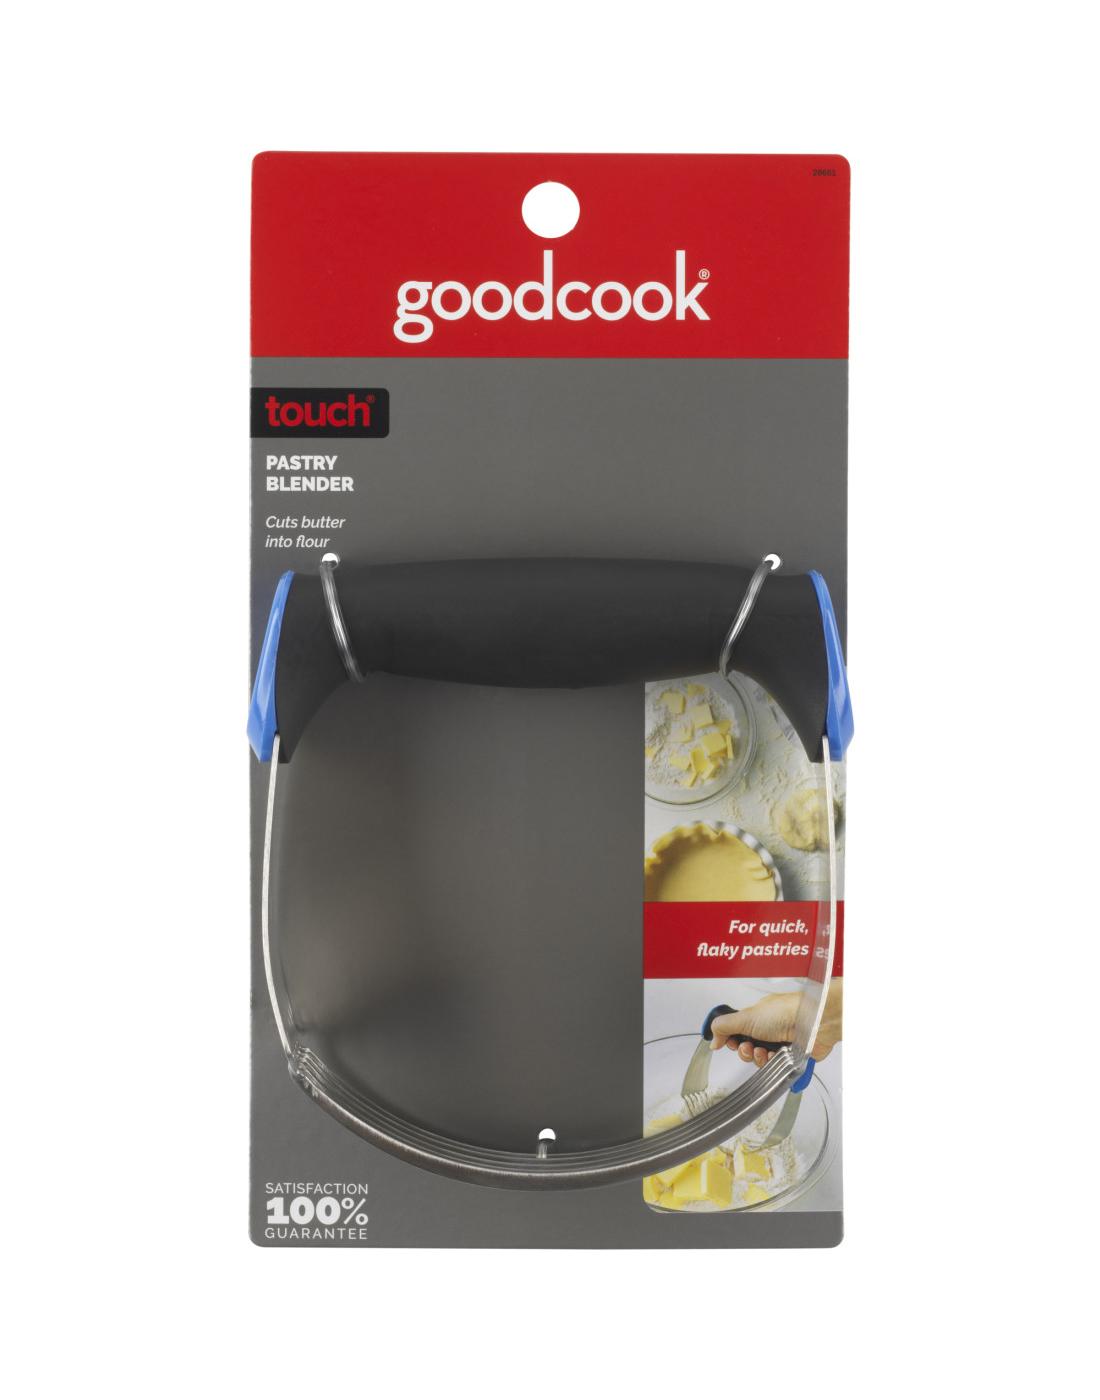 GoodCook Touch Pastry Blender; image 1 of 3